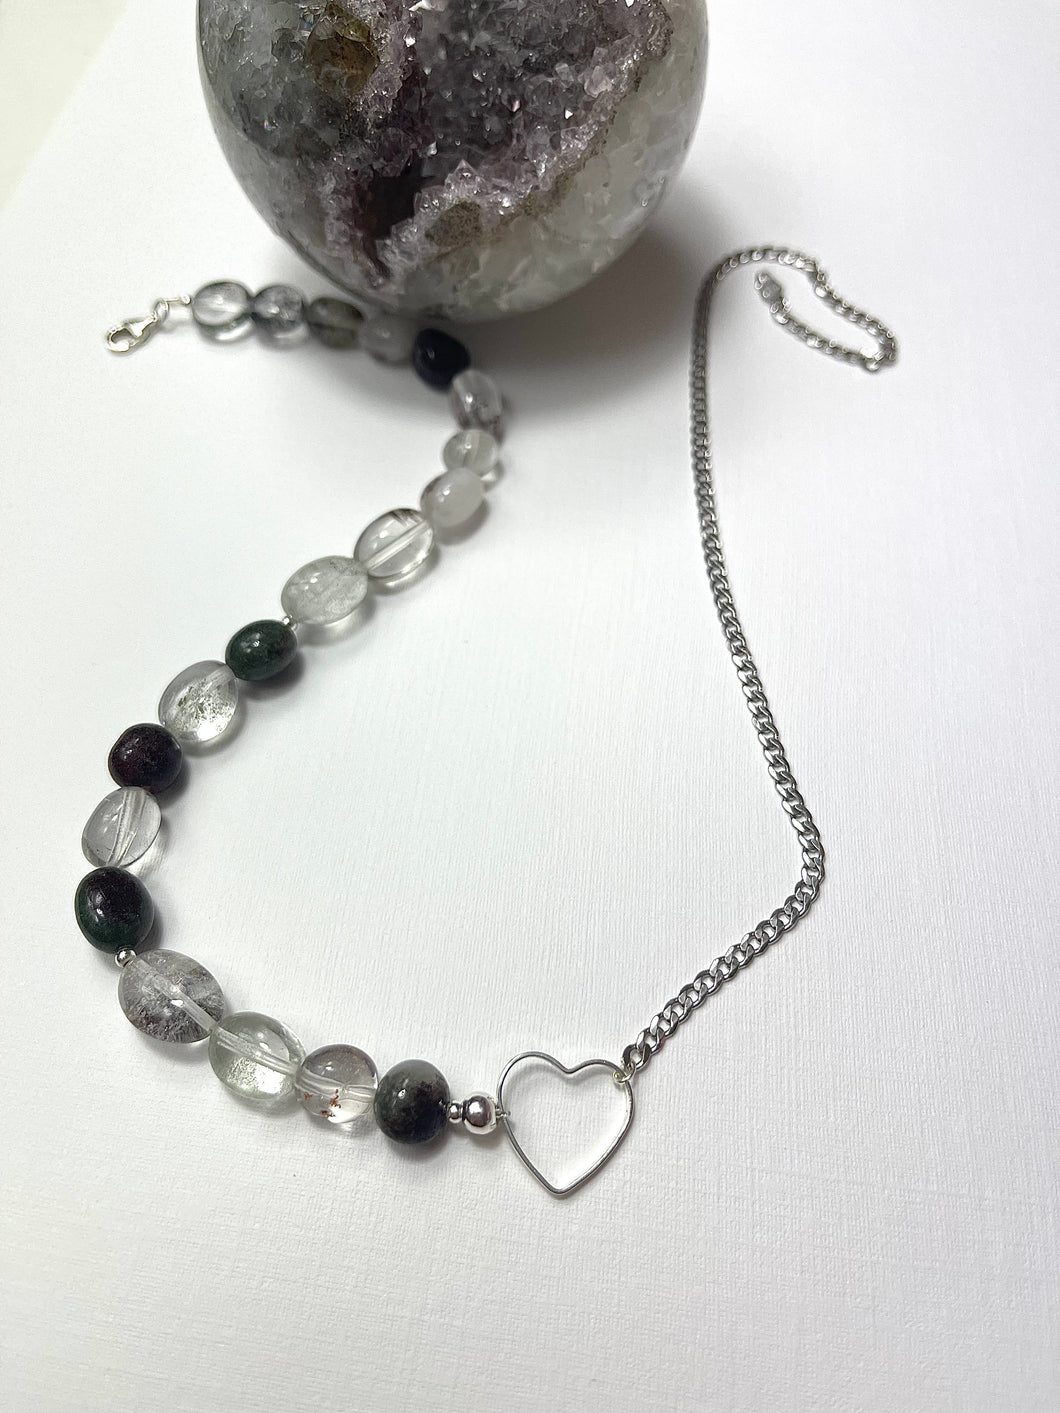 Lodalite Sterling Silver Necklace - Made to order